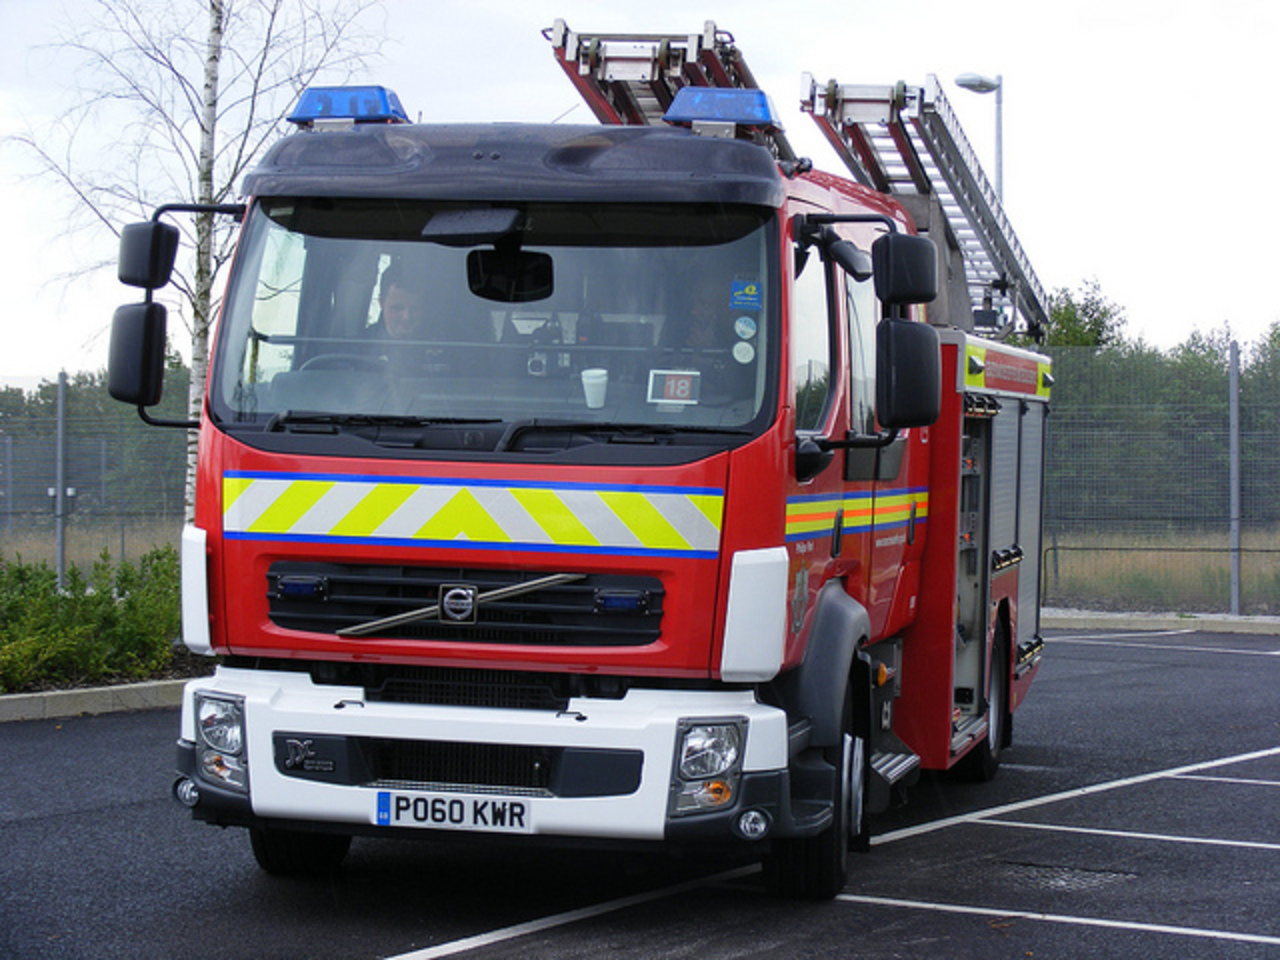 Flickr: The Volvo Fire Appliances/Apparatus Pool